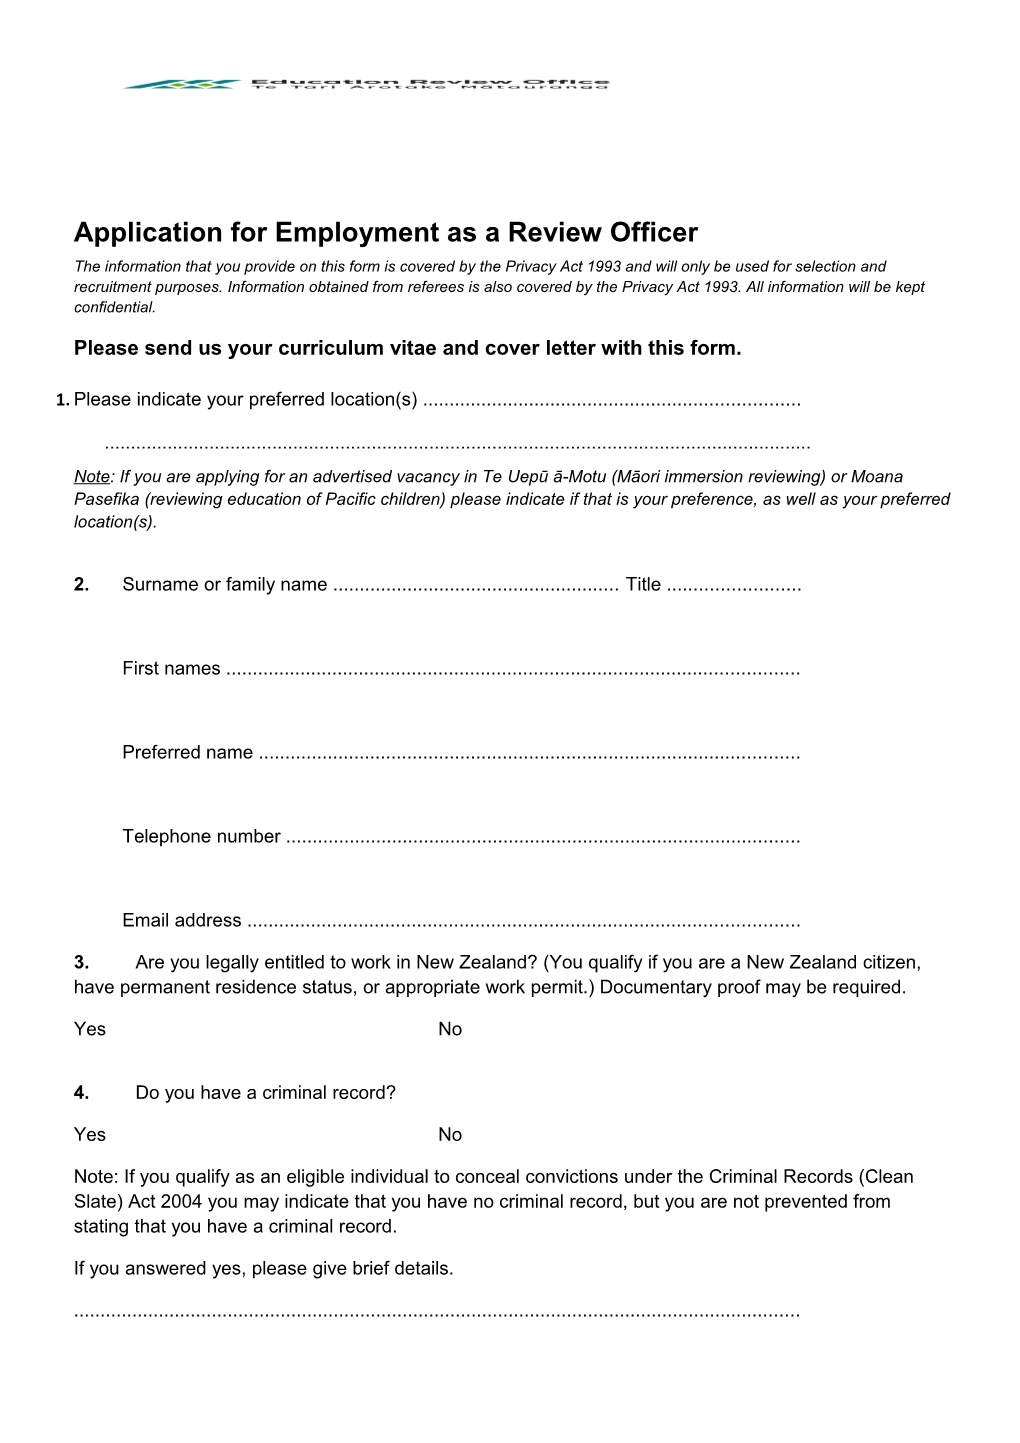 Application for Employment As a Review Officer